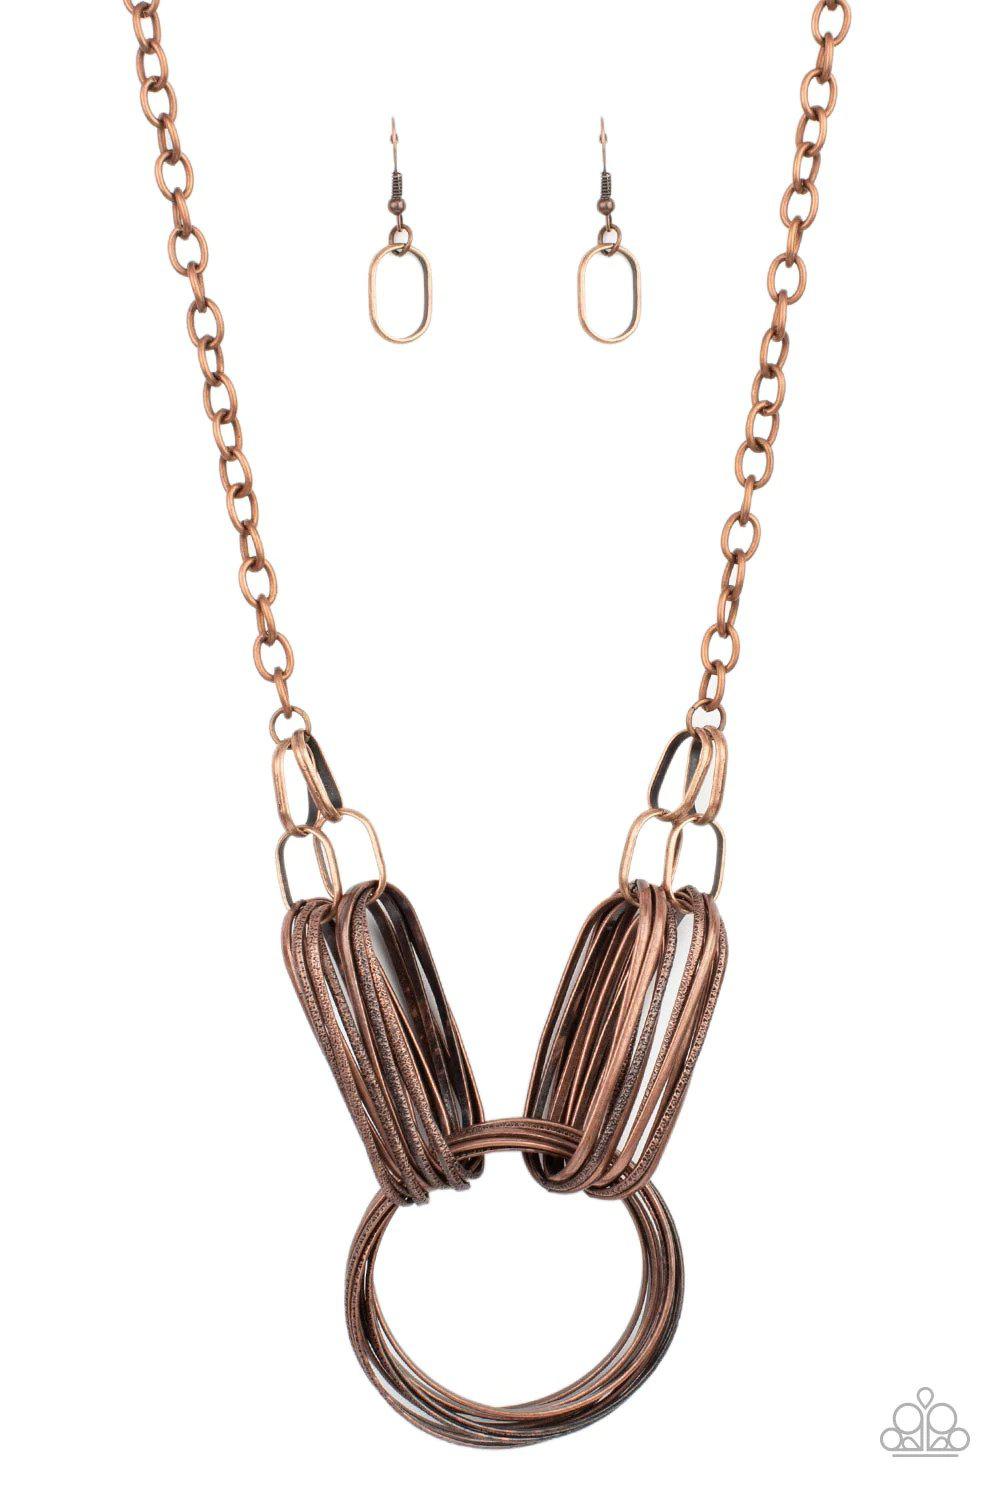 Lip Sync Links Copper Necklace - Paparazzi Accessories- lightbox - CarasShop.com - $5 Jewelry by Cara Jewels